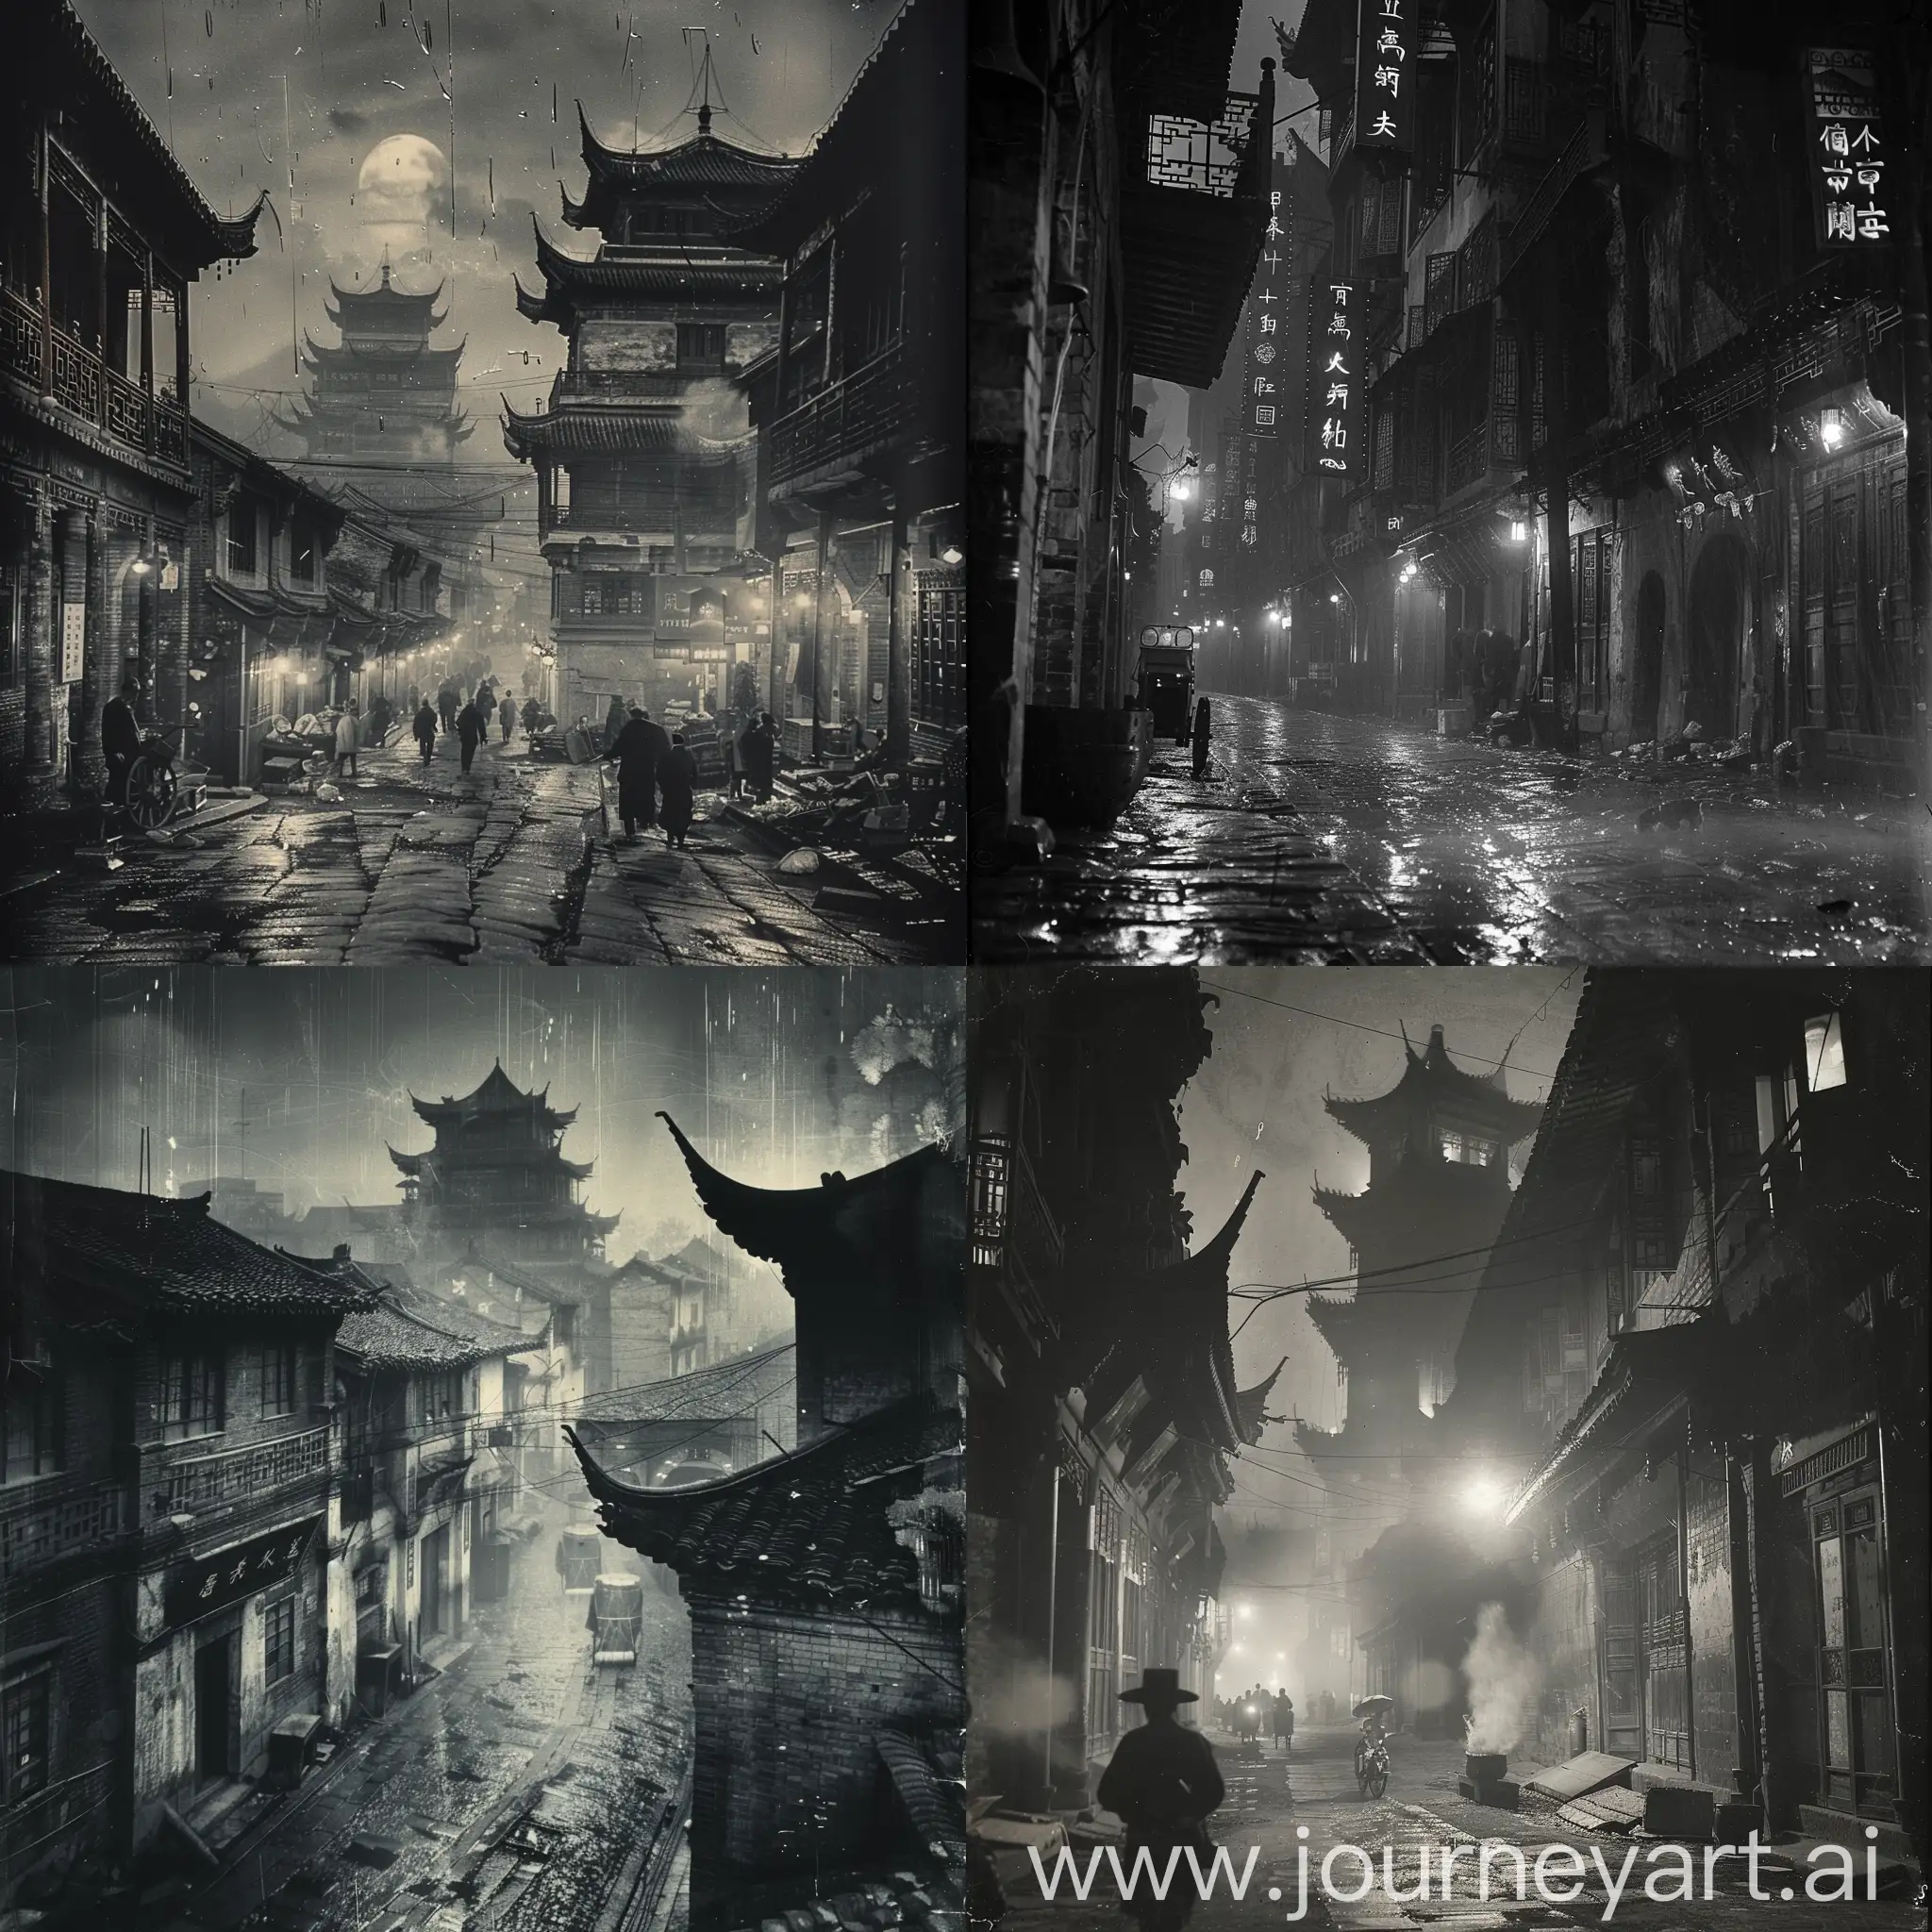 Grainy damaged photograph of the streets of ancient China at the completely pitch dark of midnight in 1950s, do not include any unsafe elements that would trip the content filter.